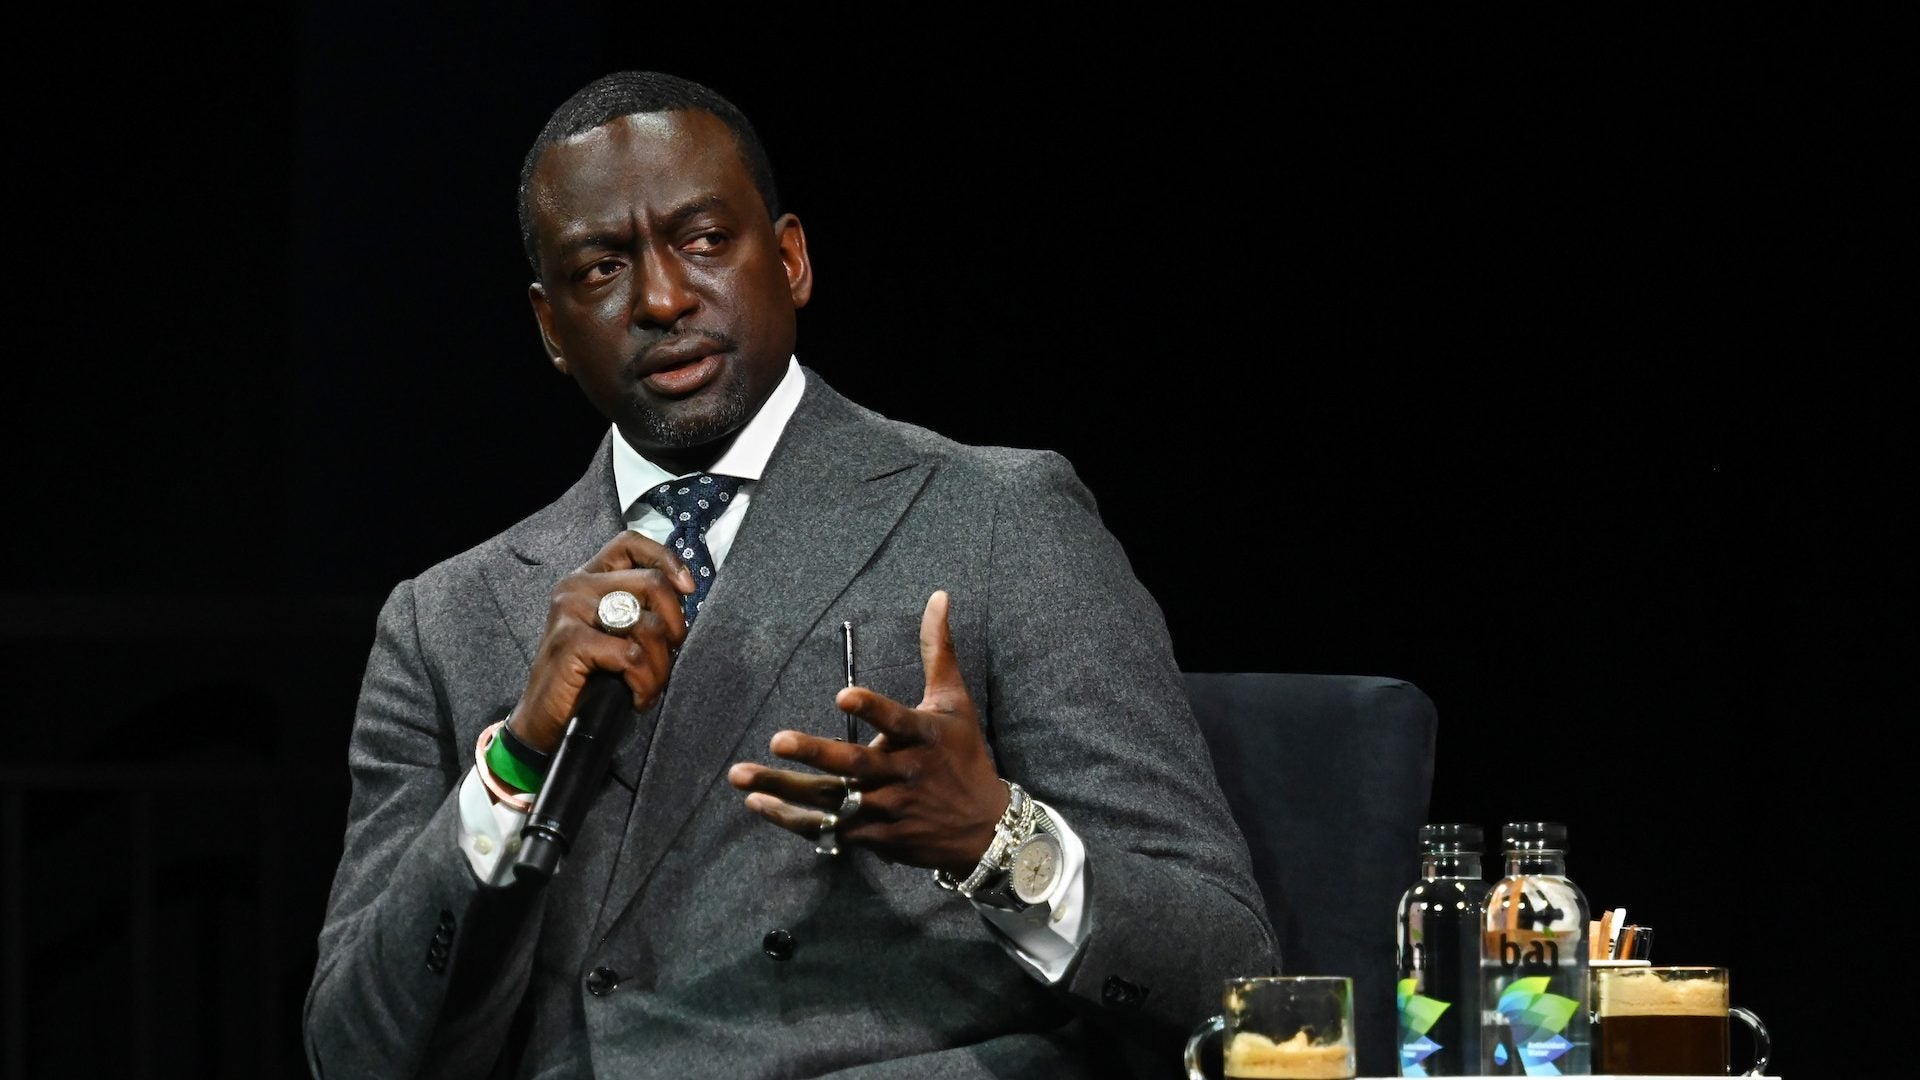 NYC Councilman Yusef Salaam, Who Was Exonerated In Central Park Five Case, Says Police Pulled Him Over Without Reason